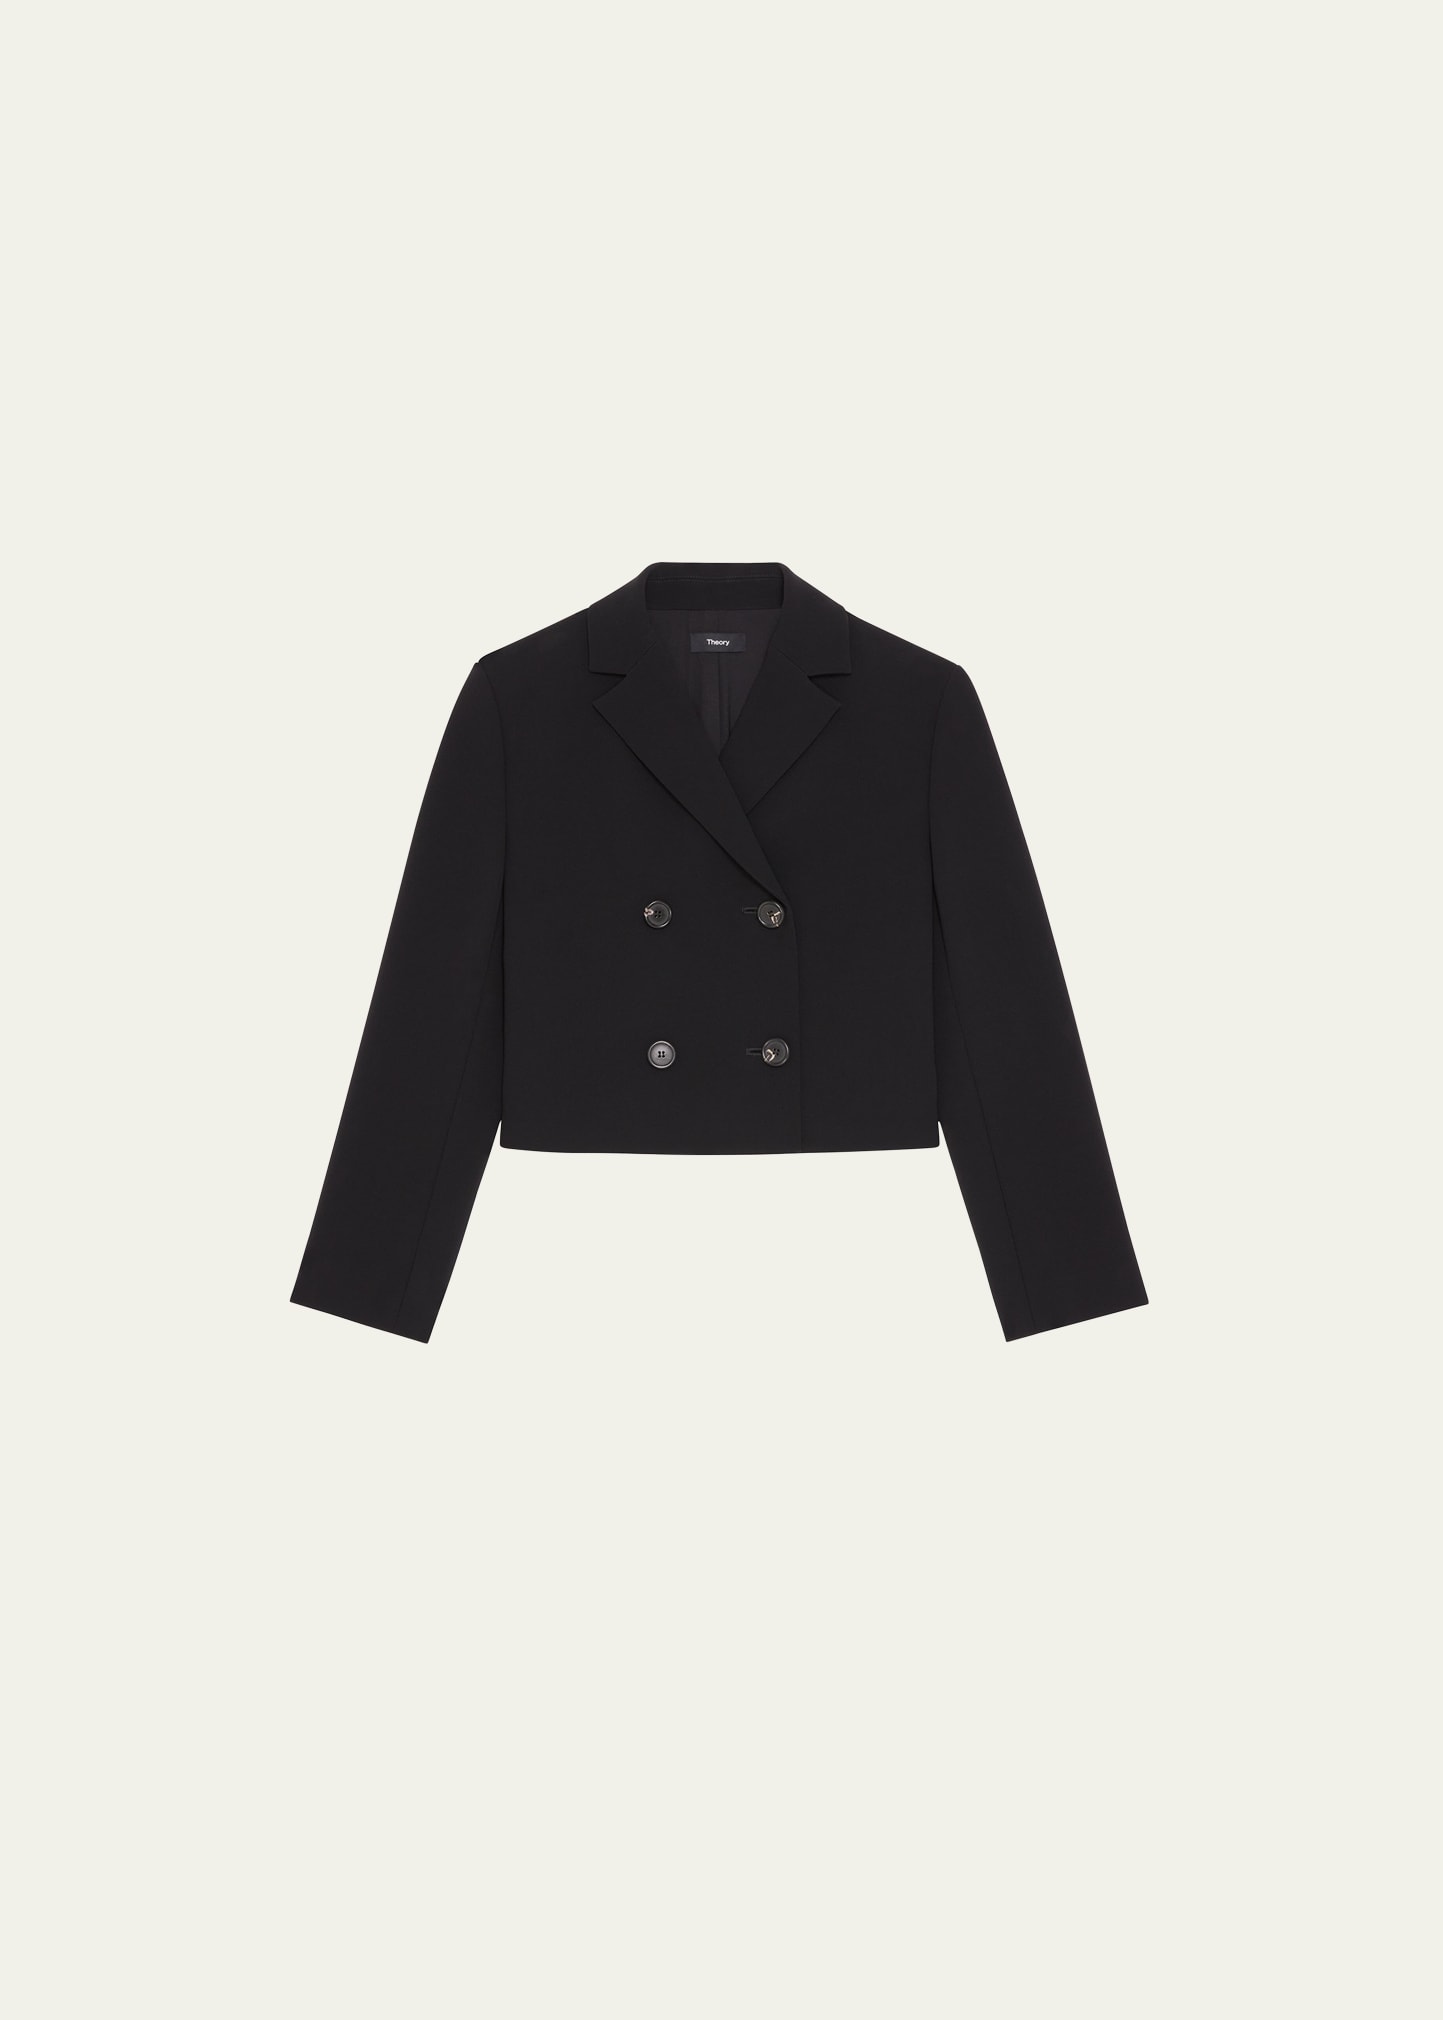 Admiral Crepe Double-Breasted Crop Jacket